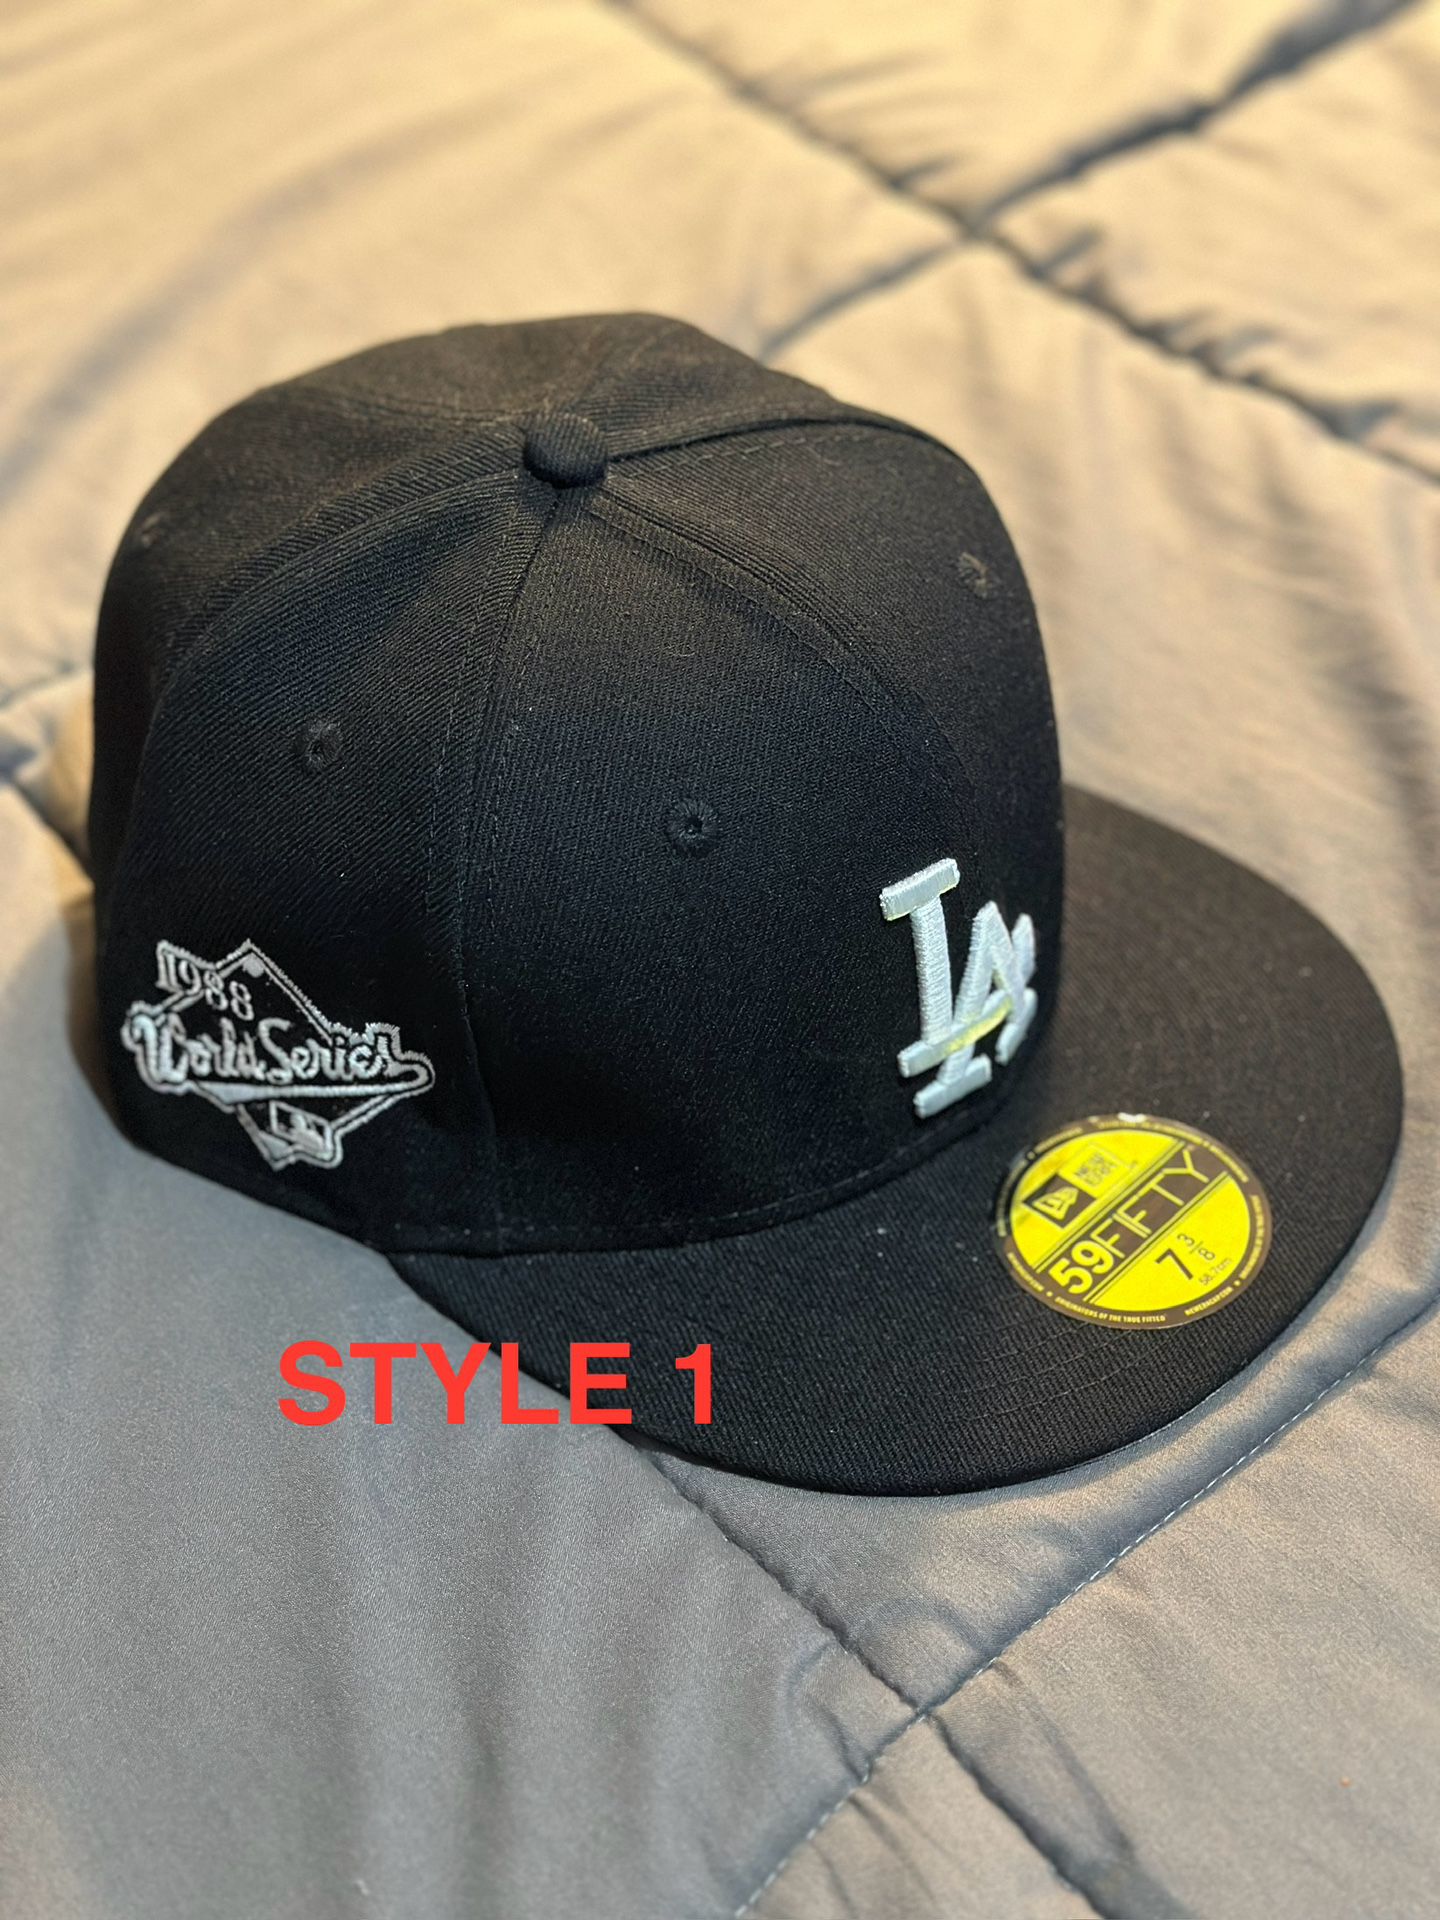 NEW! LA Dodgers Fitted Cap 59fifty